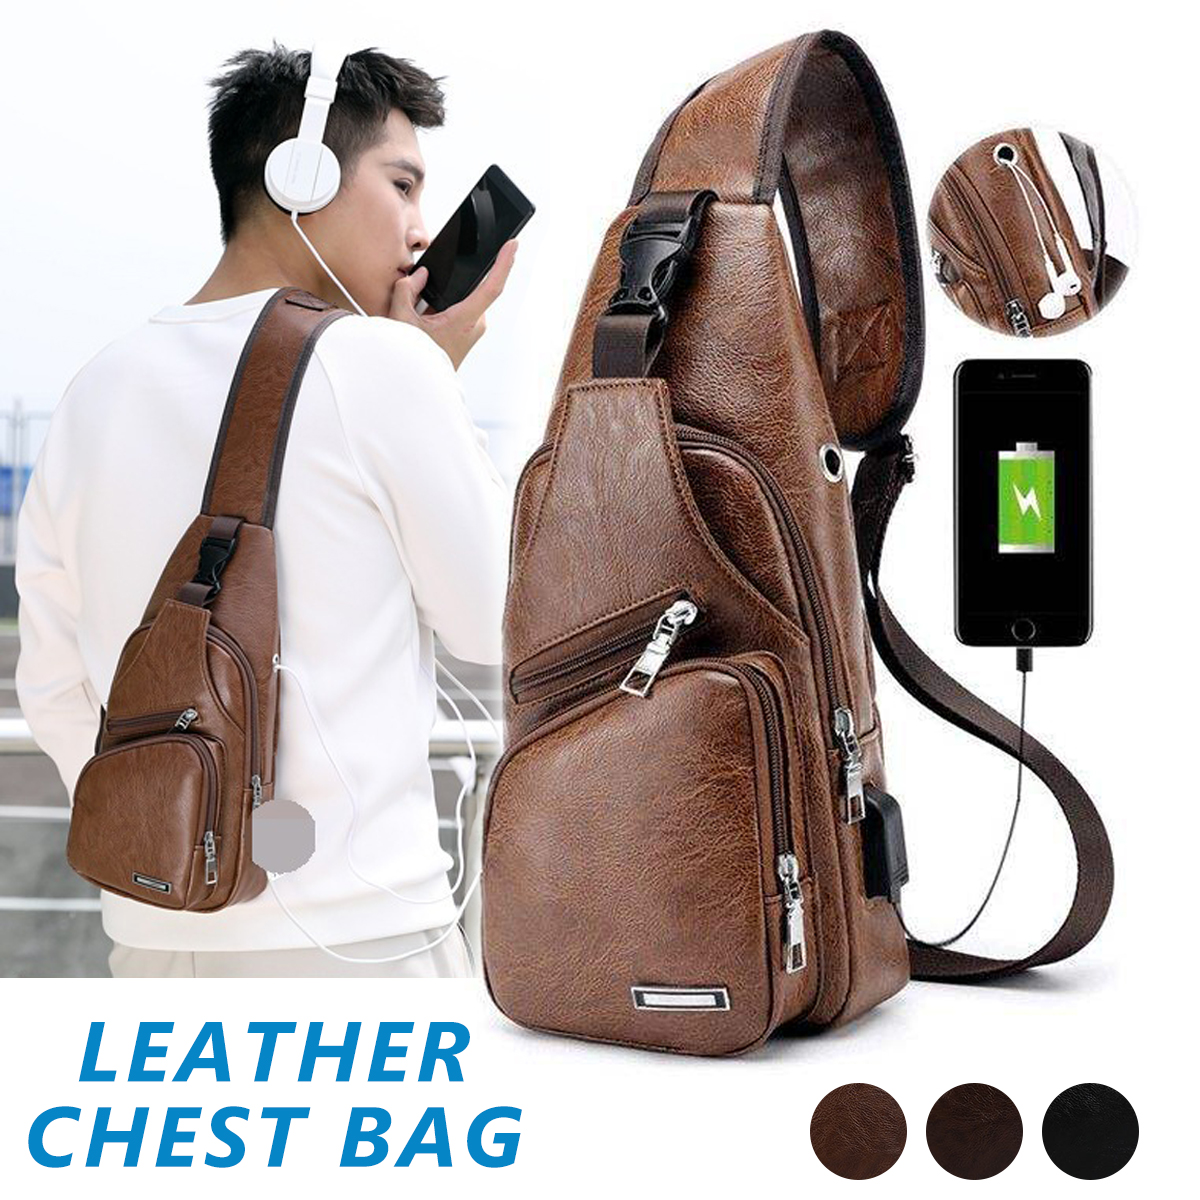 Casual-Outdoor-Travel-USB-Charging-Port-Sling-Bag-Leather-Chest-Bag-Crossbody-Bag-1637756-1